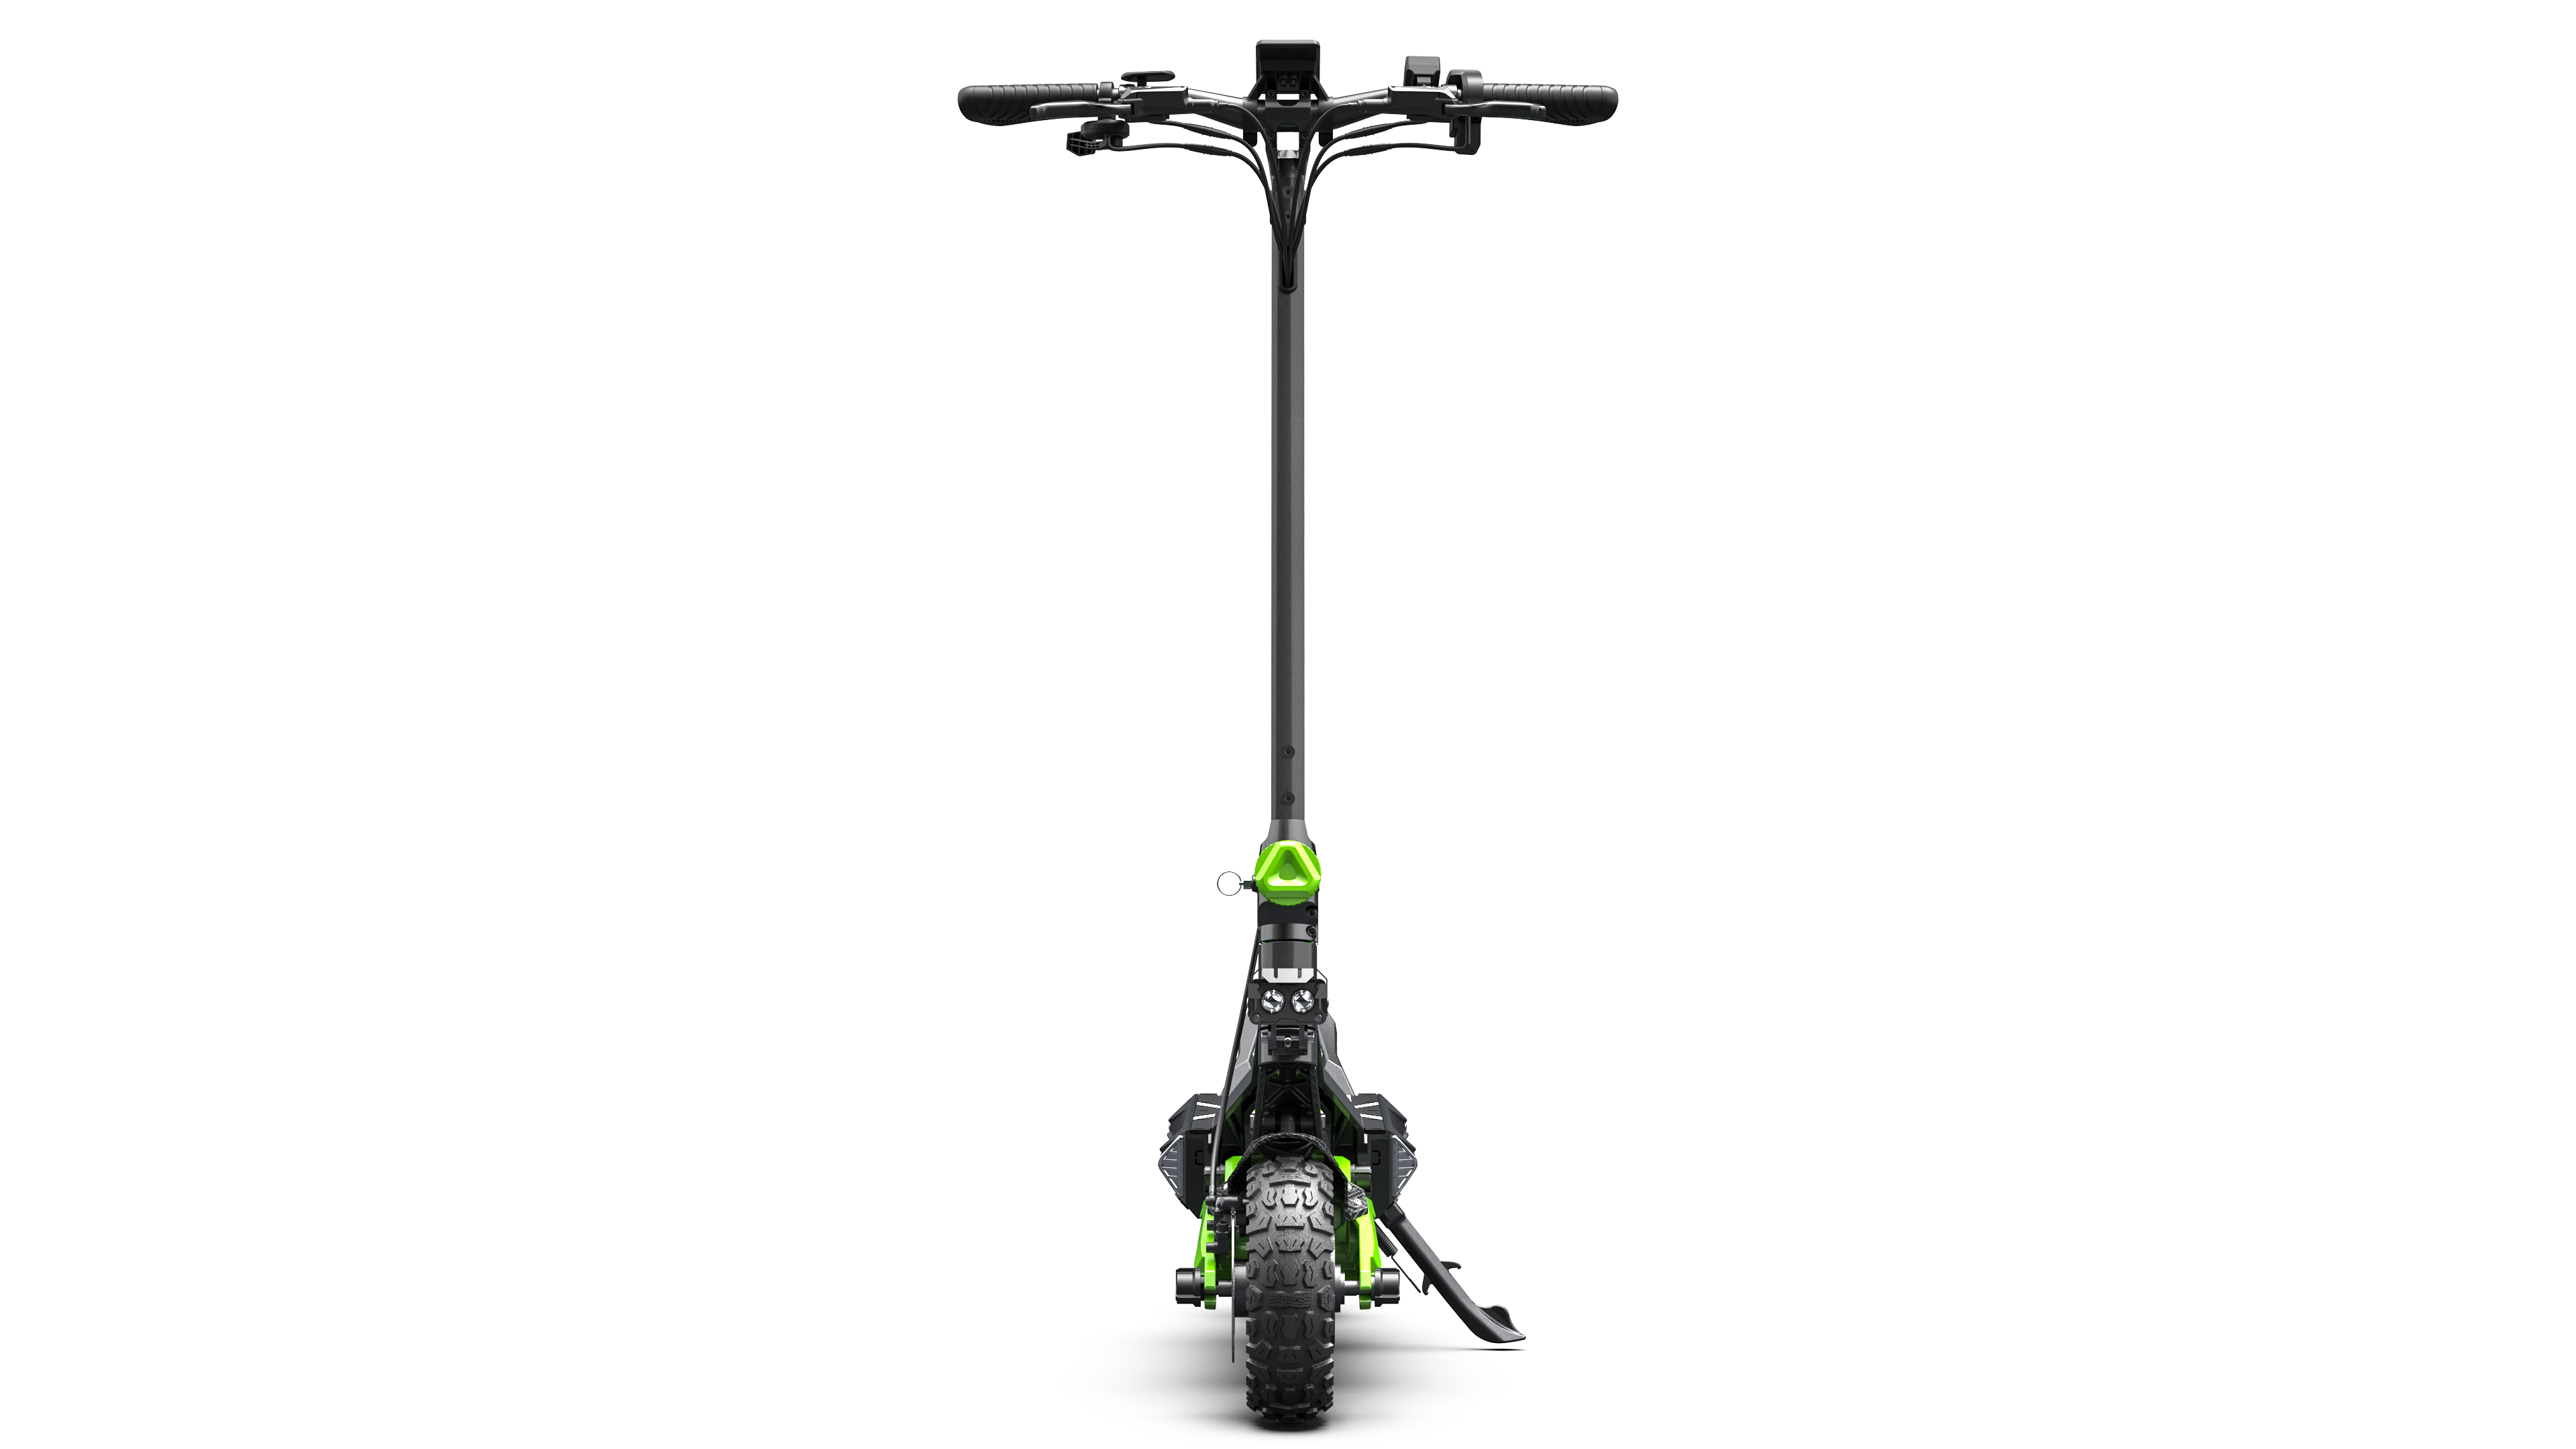 CYBERBOT R6 3000W Dual Motor Electric Scooter, Off- Road E-scooter, Soild Tire, Green&Black